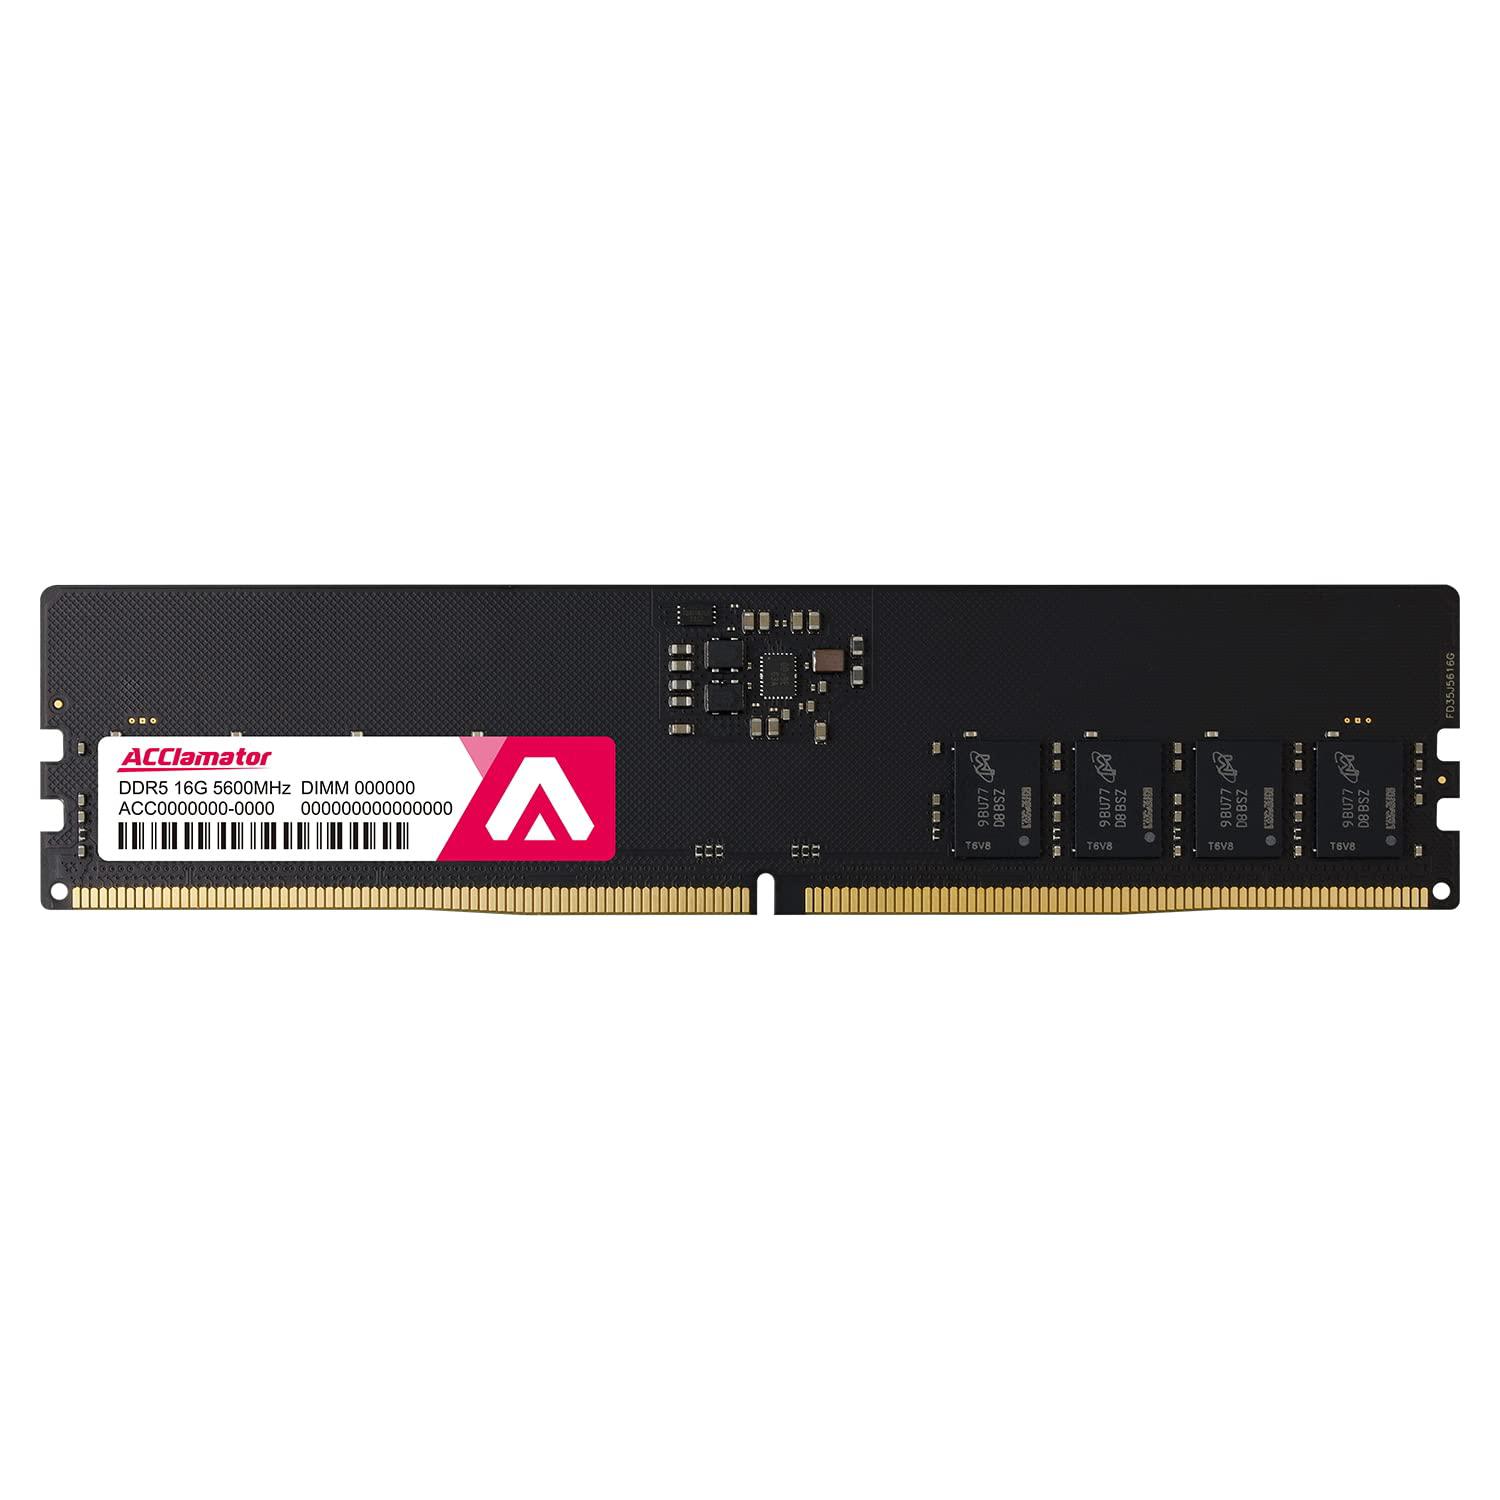 Acclamator 16gb ddr5 ram 5600mhz (pc4-44800) desktop (dimm) computer memory cl42 (compatible with 5600mhz) acclamator